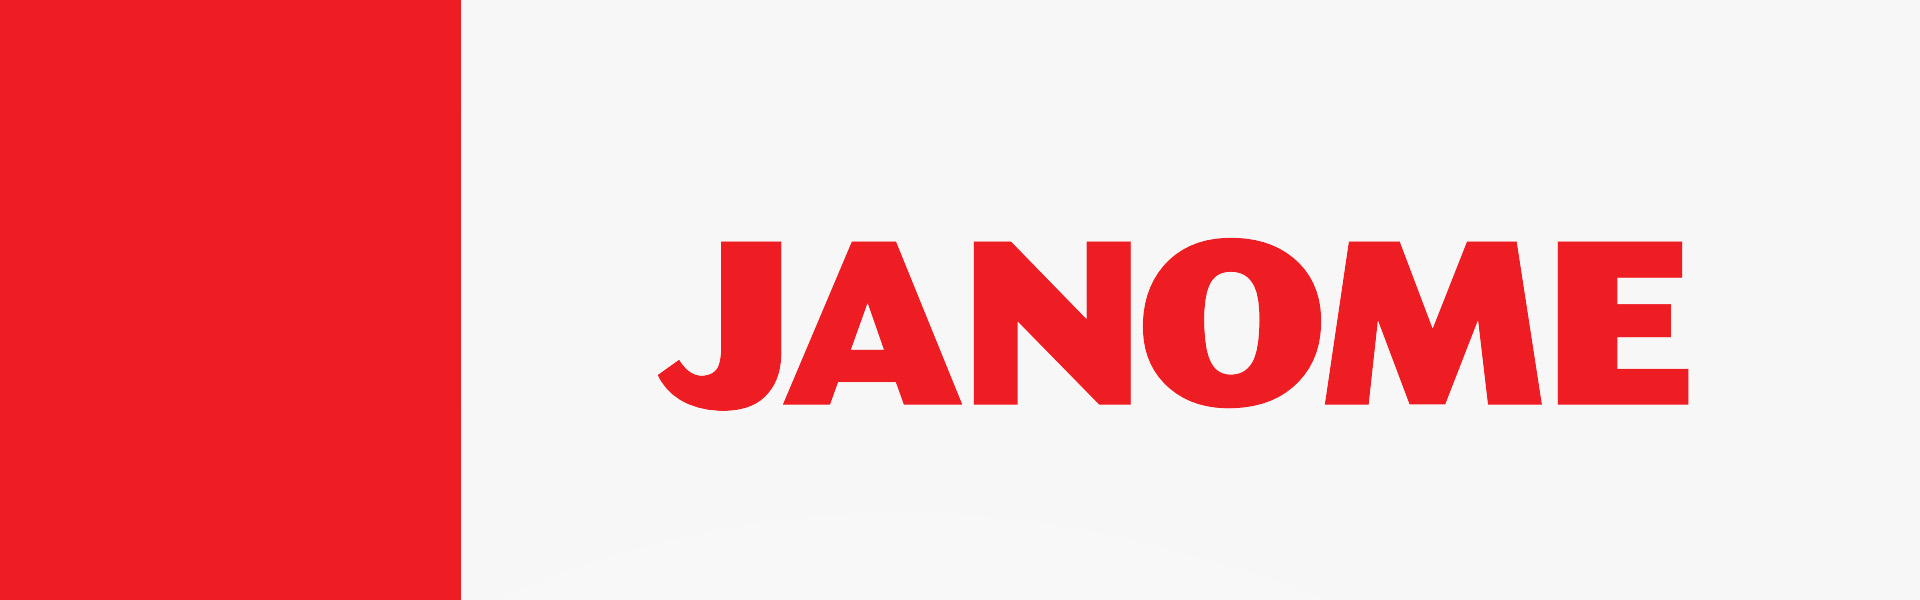 JANOME T-72 